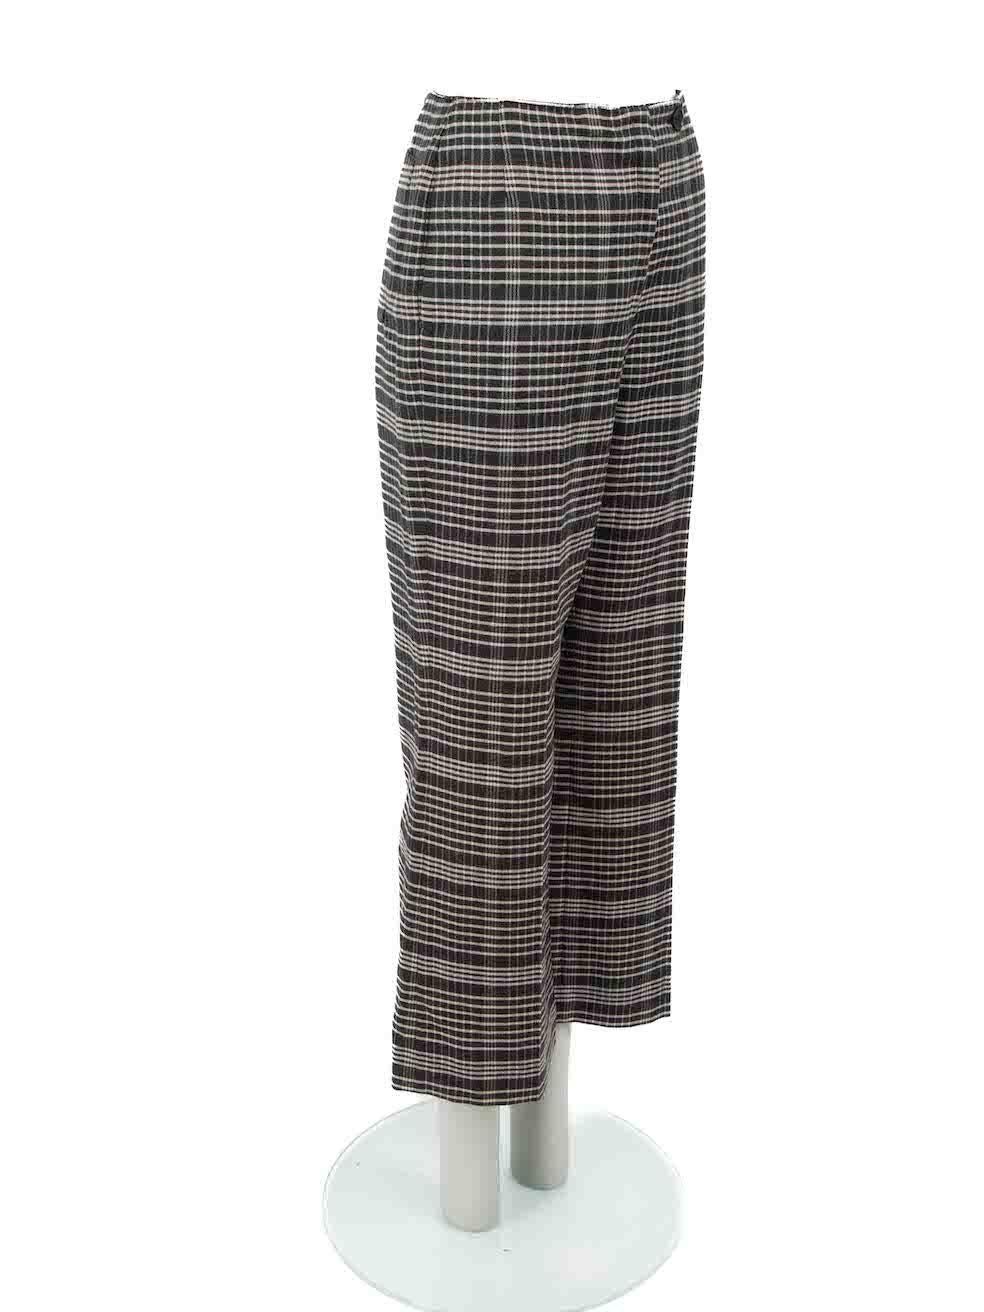 CONDITION is Very good. Hardly any visible wear to trousers is evident on this used Acne Studios designer resale item.

Details
Grey
Wool
Wide leg trousers
Checkered pattern
Cropped length
High rise
Front zip closure with button
2x Front side